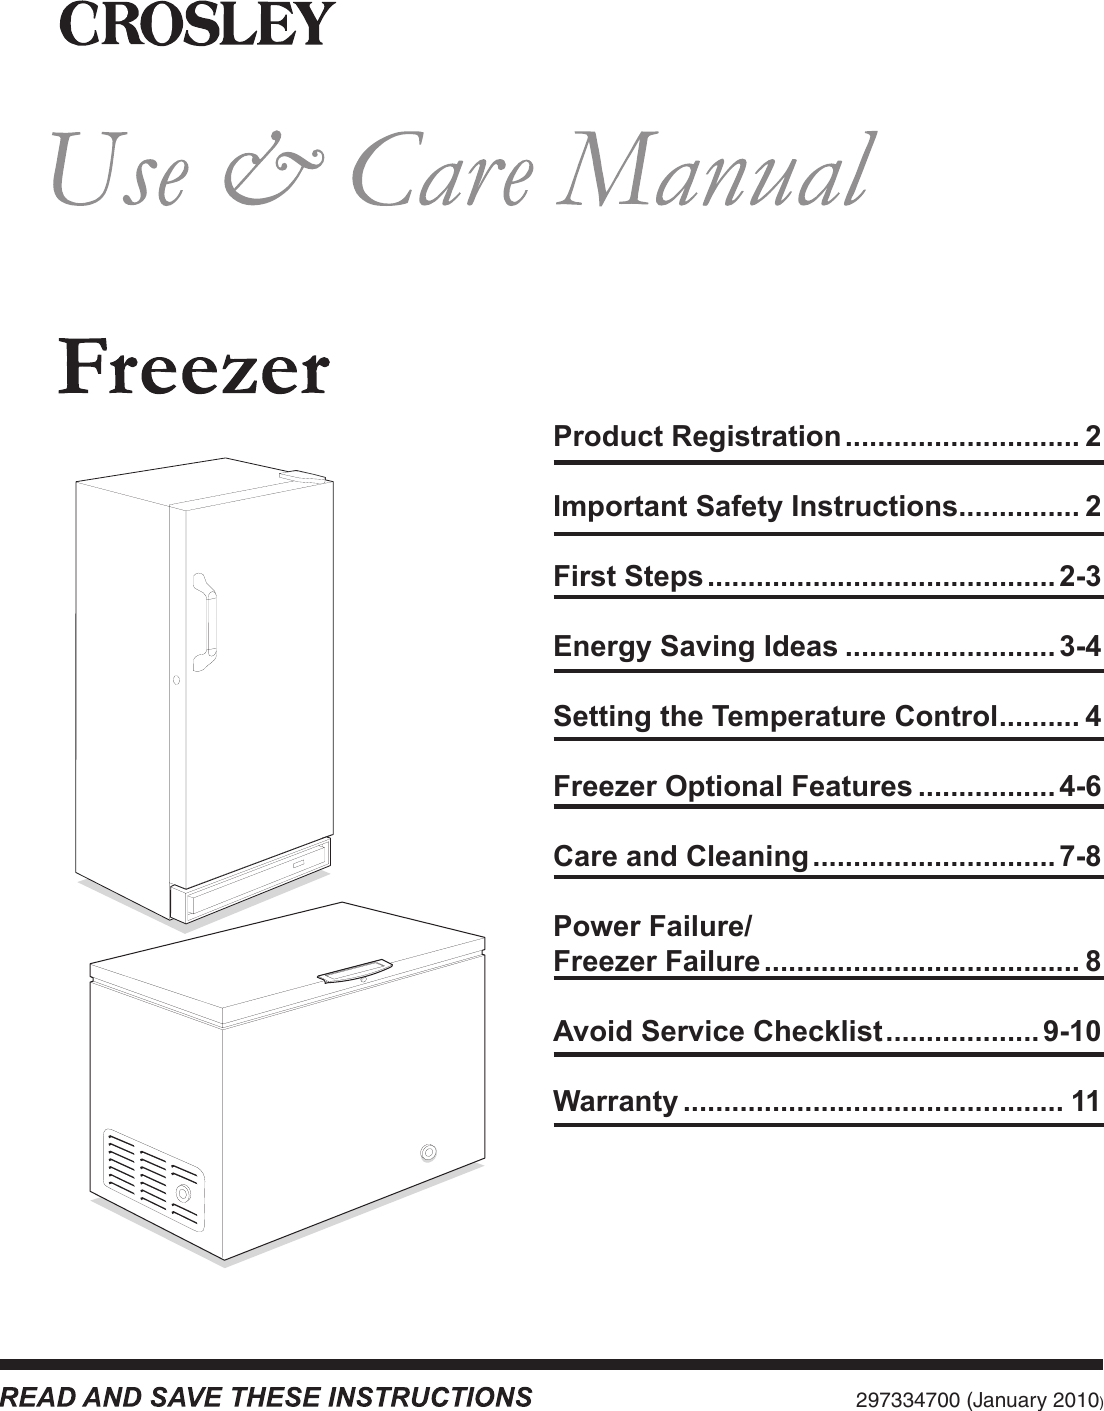 Page 1 of 11 - Crosley Crosley-Defrost--Owner-S-Manual